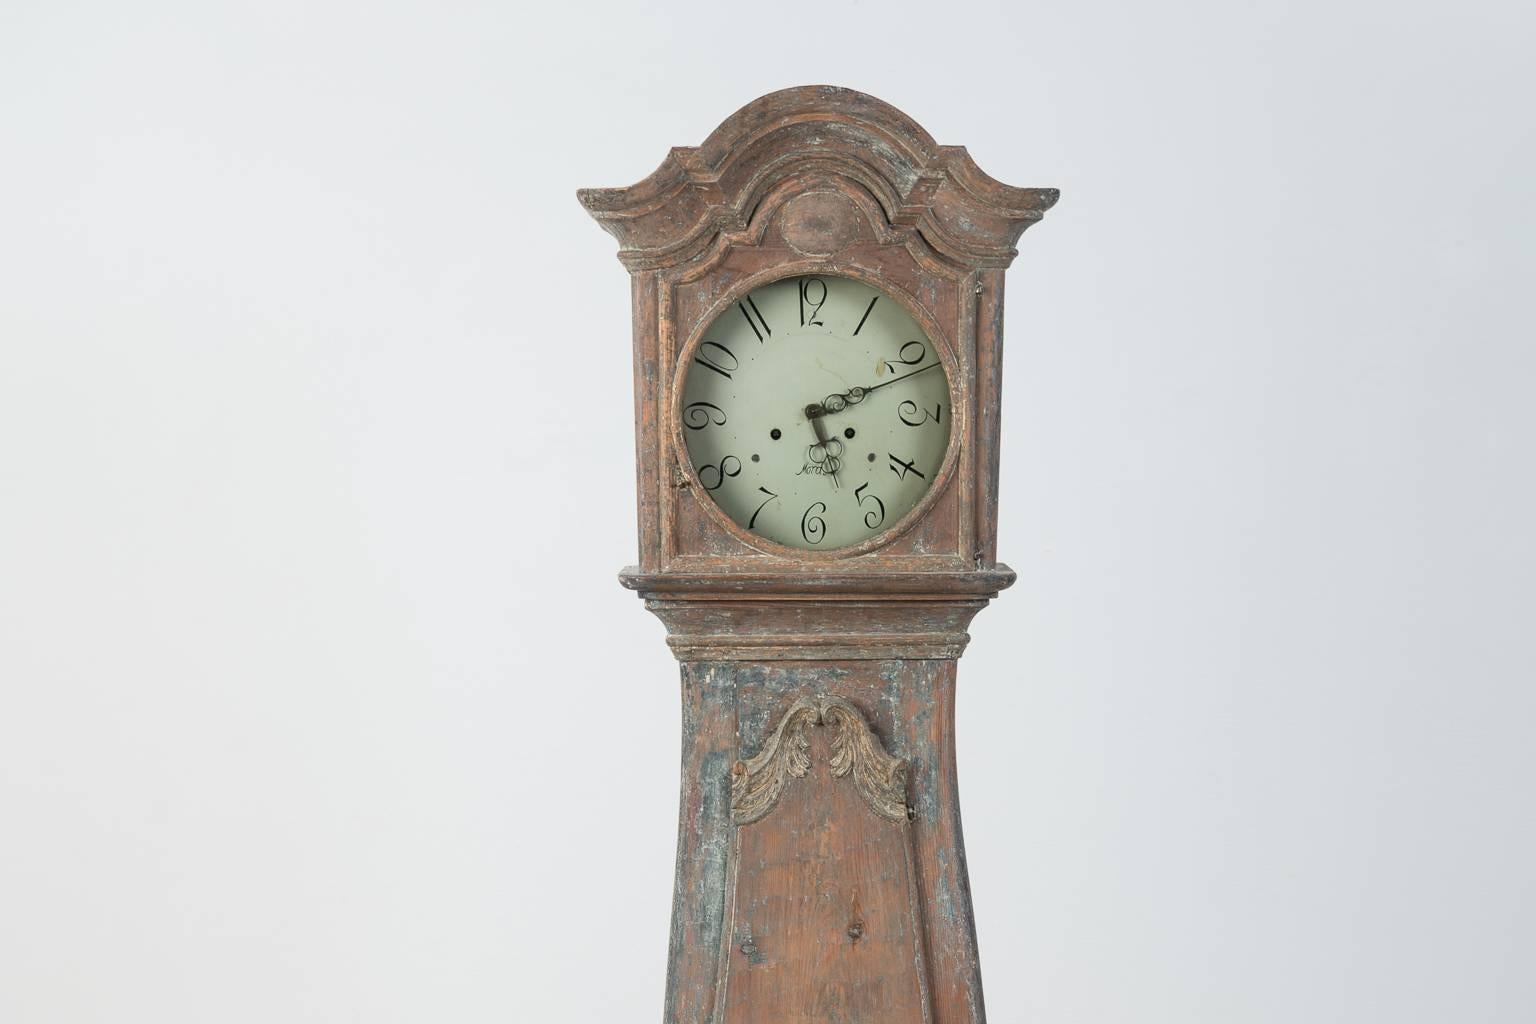 Early Swedish rococo long case clock manufactured during the early rococo period when there still were influences from the baroque period. Case in straight shape with carved wooden rococo decor and the hood with curved top. Scraped to original paint